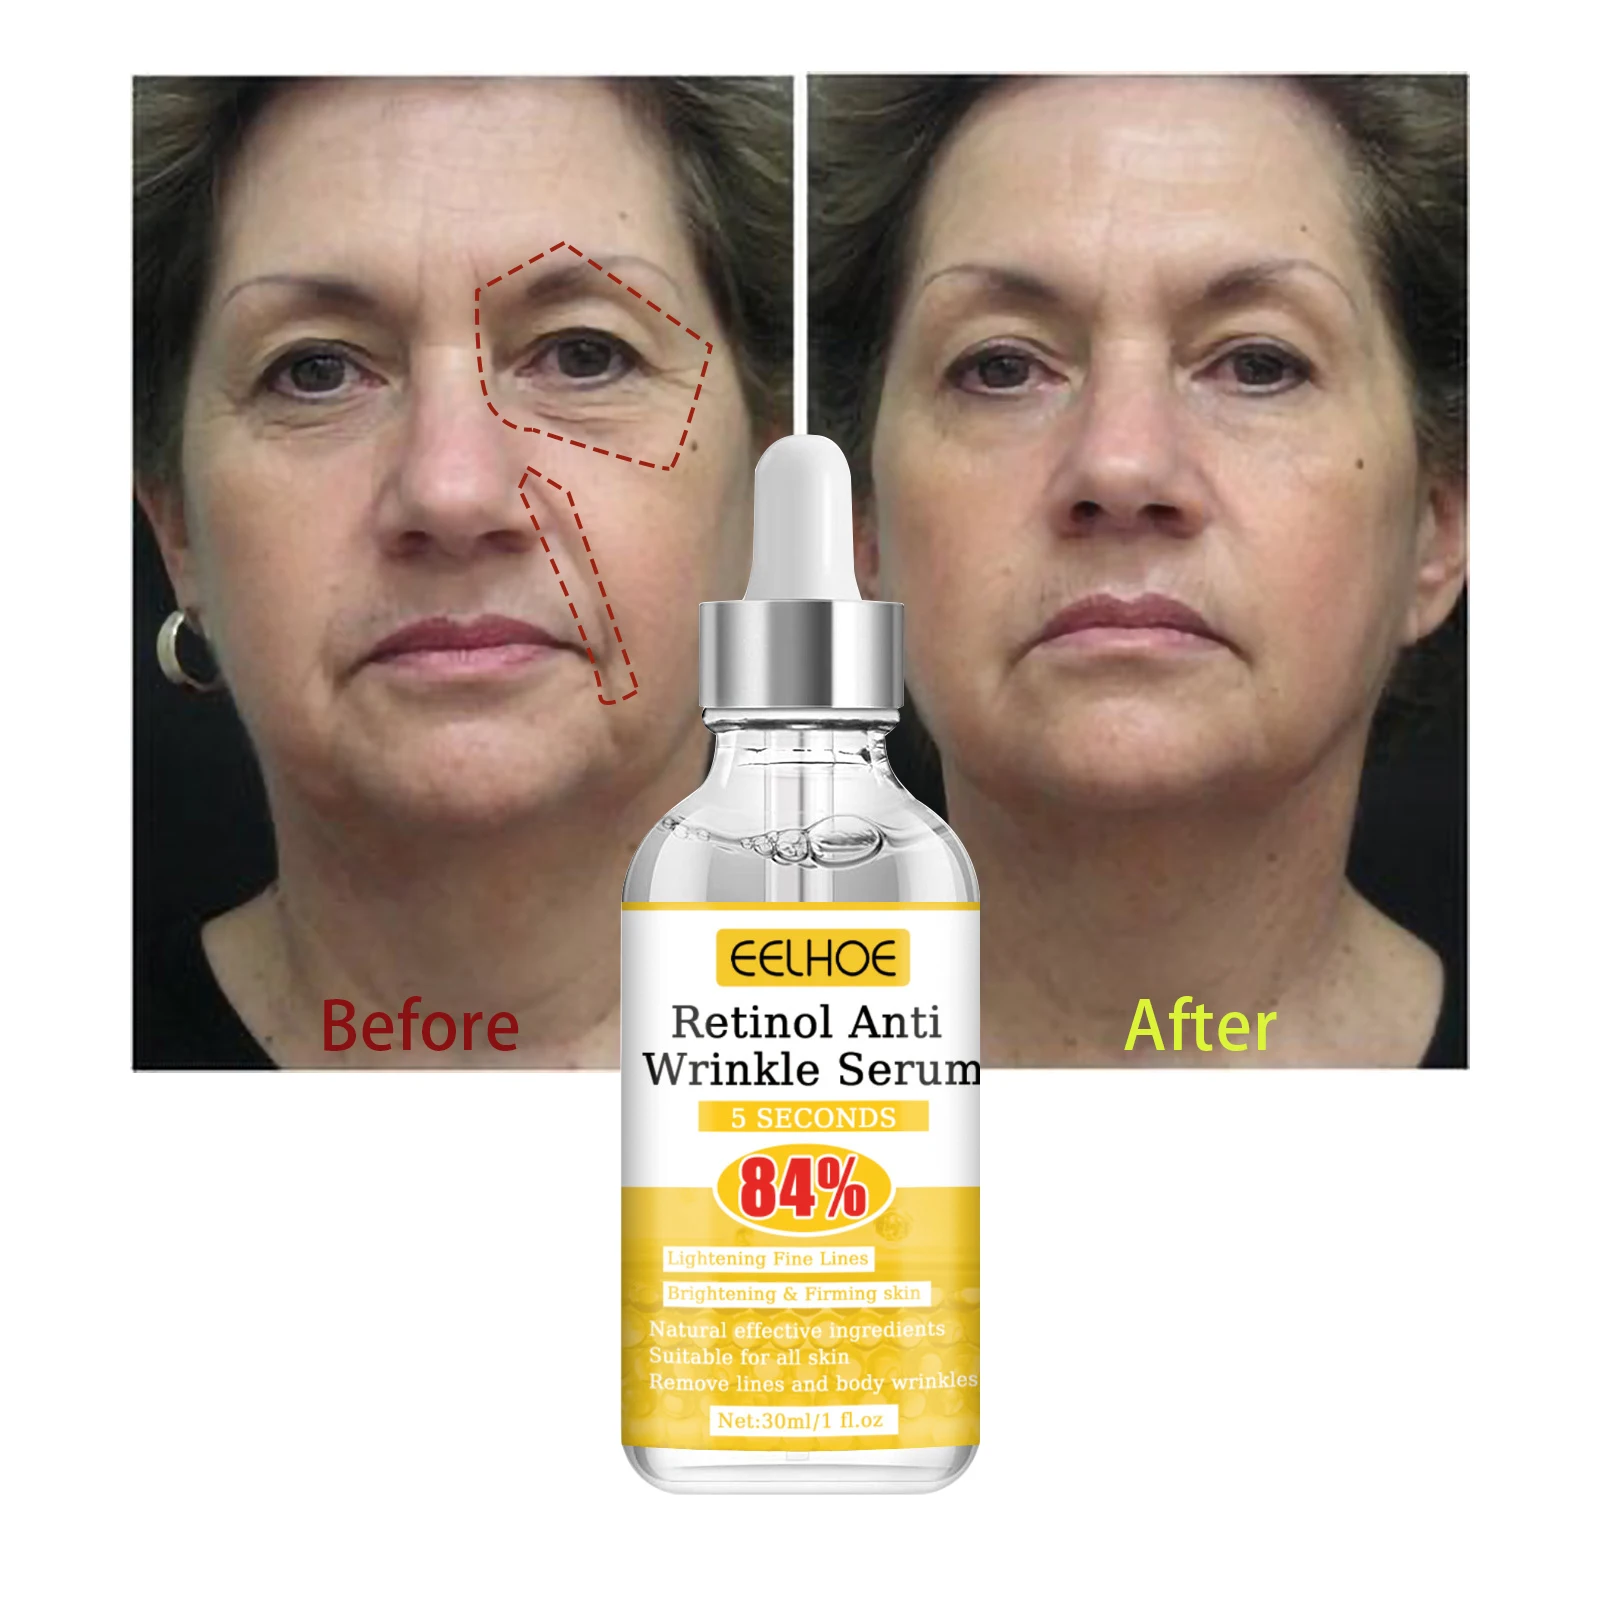 Retinol Anti Aging Remove Wrinkle Serum Whitening Anti Aging Oil Hydrating Shrink Pores Instant Wrin Anti-aging Reduce Fine Line